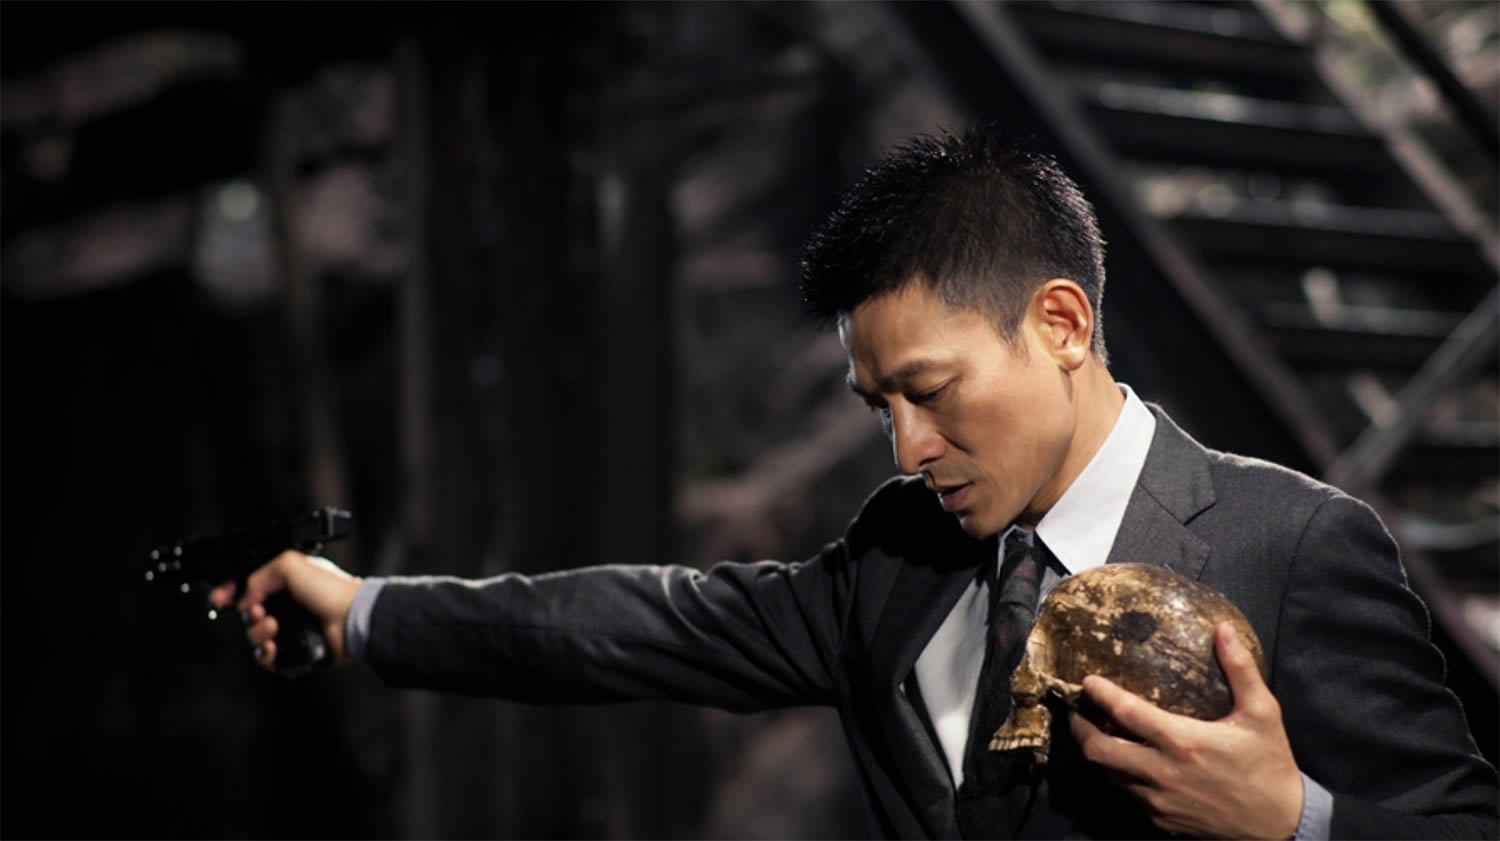 actor holding a human skull and with gun in other hand, blind detective